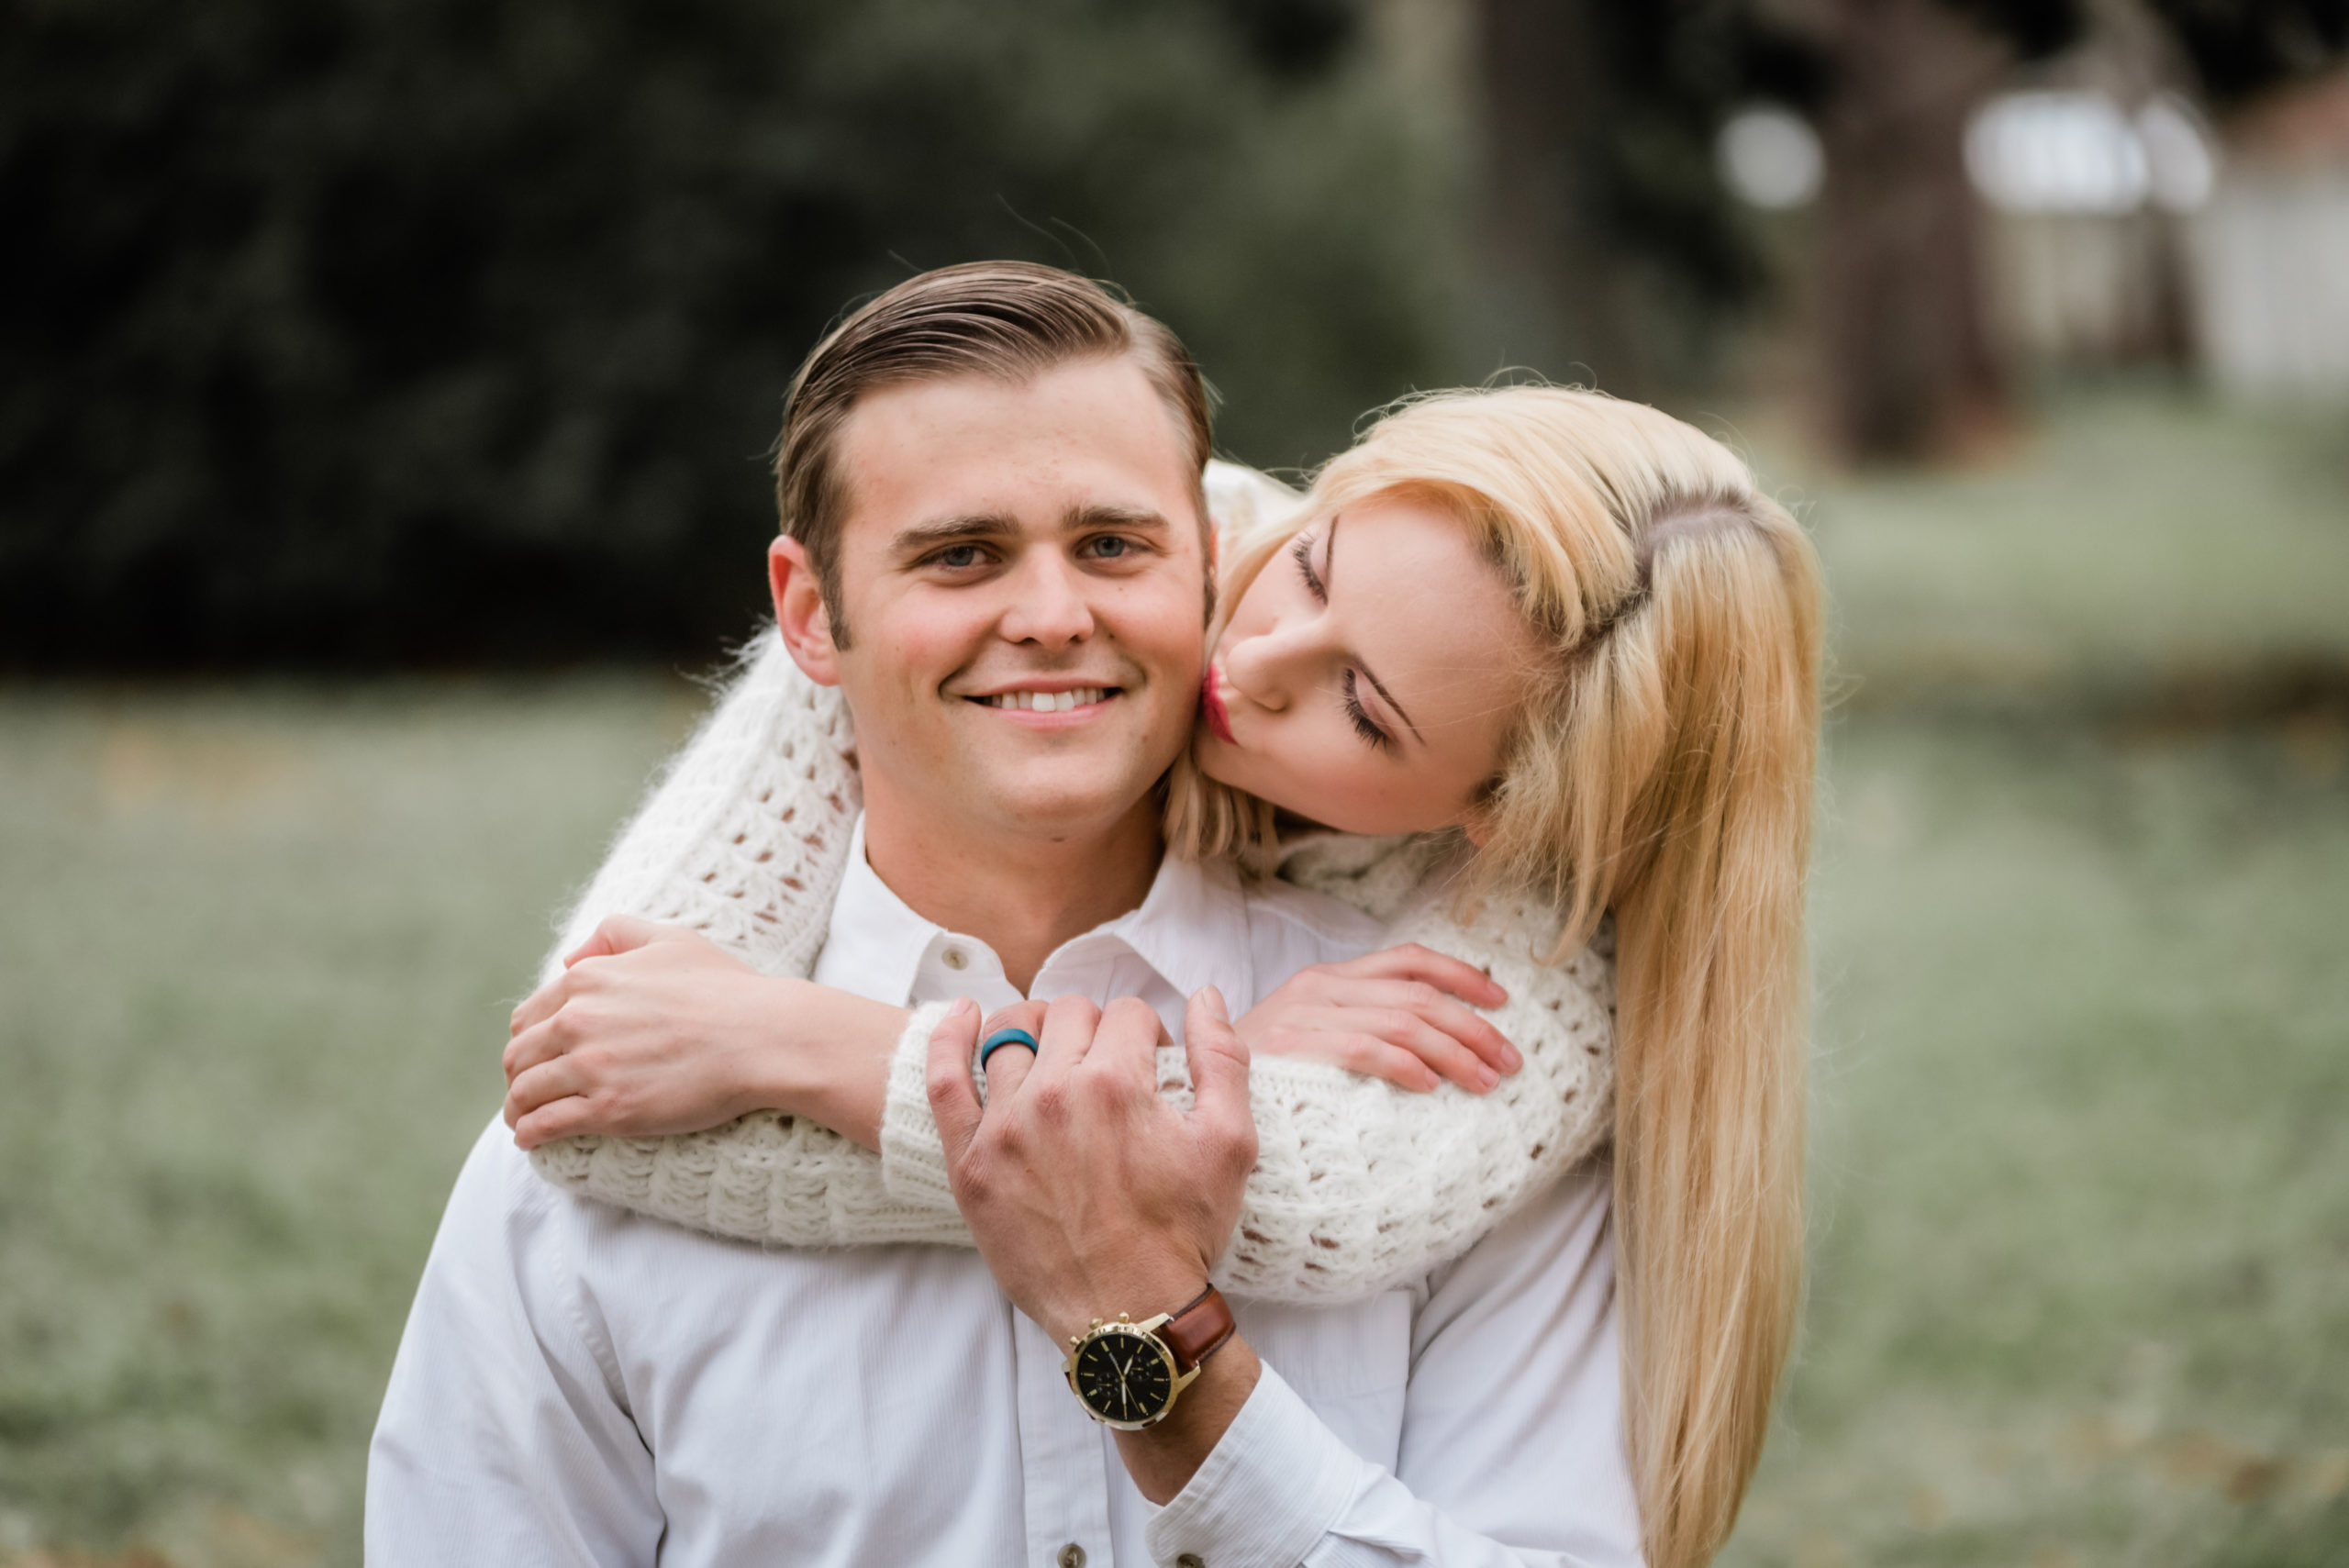 couples engagement photos at heritage park and gardens in live oak Florida by Black tie and co